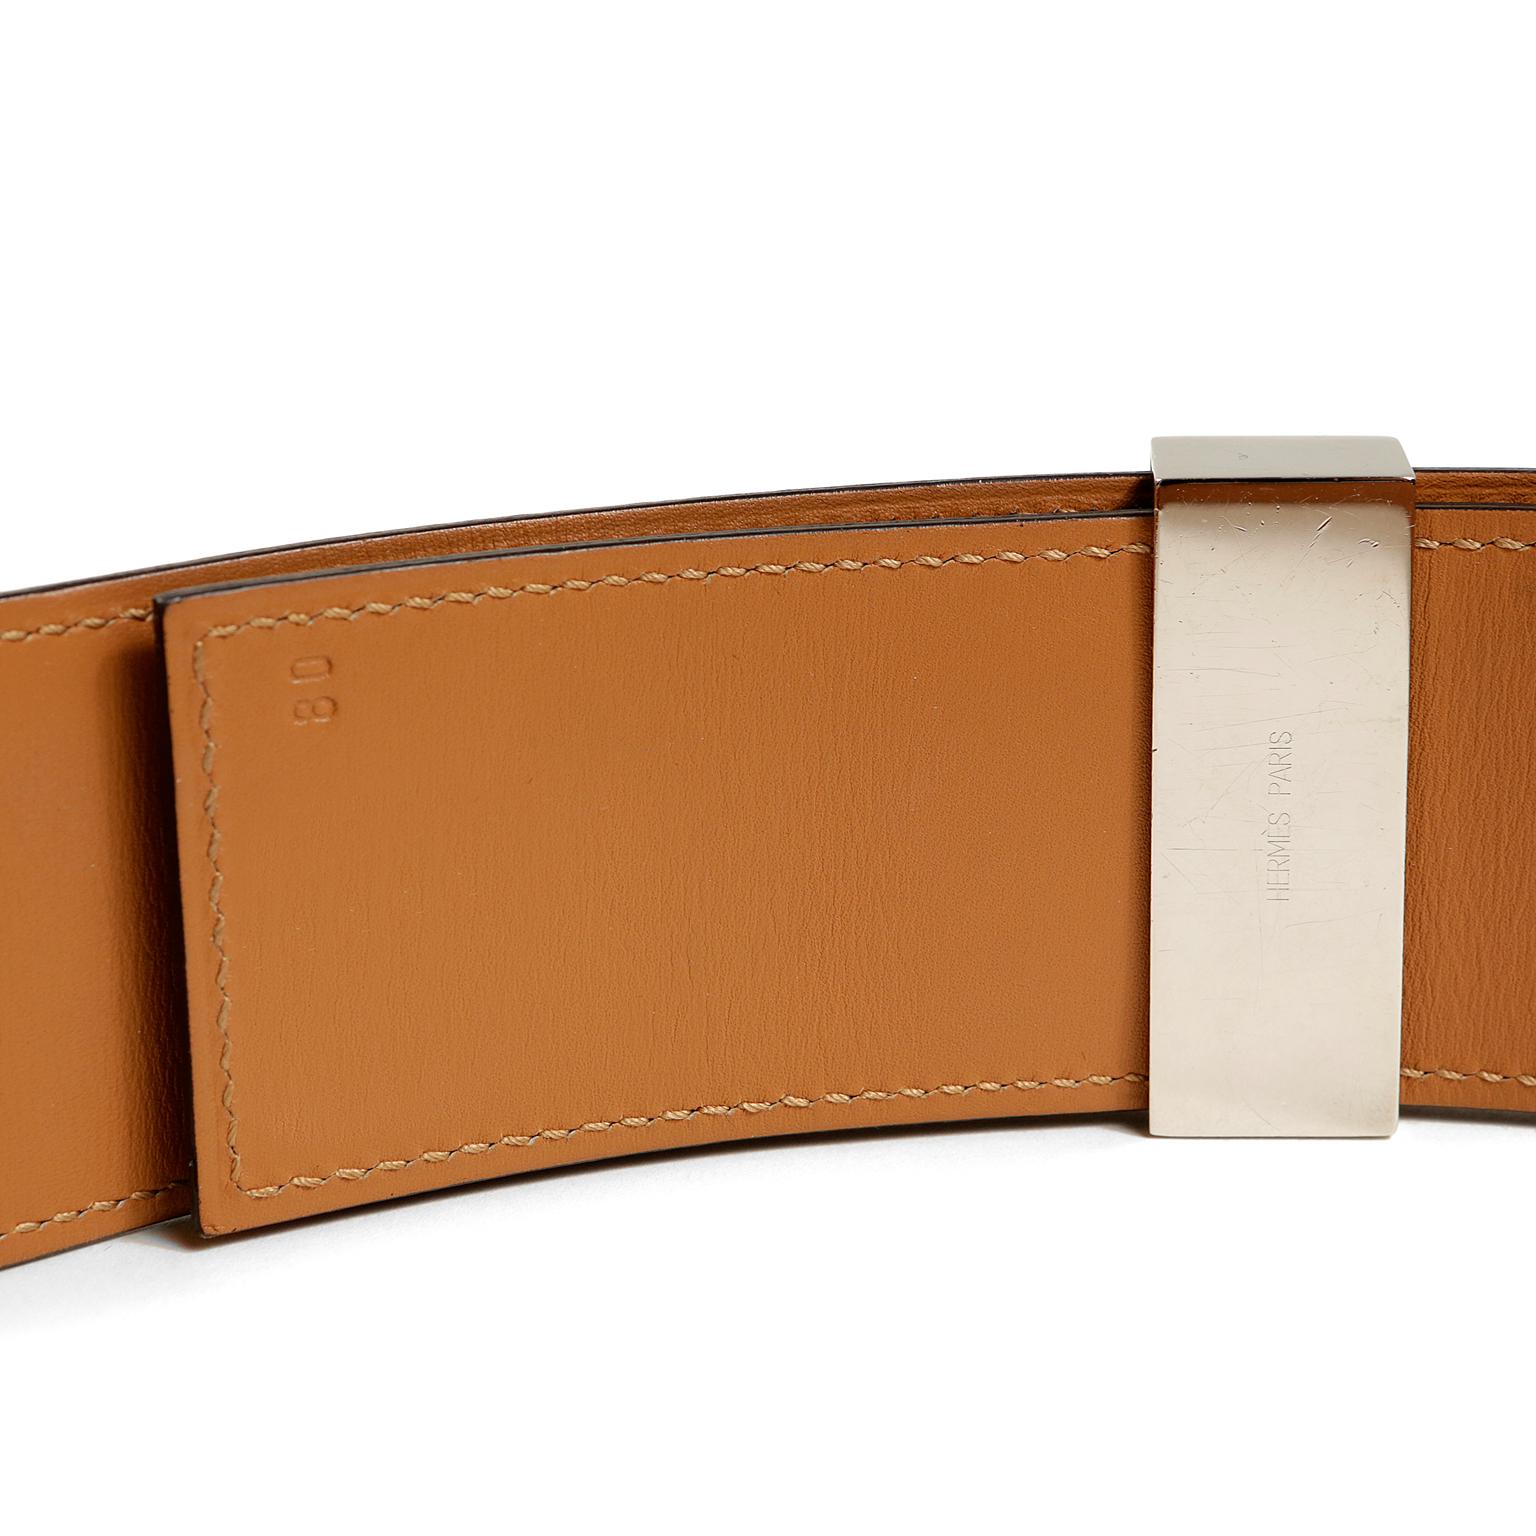 Hermès Bleu Electrique Epsom Leather Medor Belt- Excellent Plus Condition
Textured and durable Epsom leather in brilliant Bleu Electrique is accented with palladium hardware pyramidal studs and ring.  Adjustable buckle.   Size 80.  Made in France.

